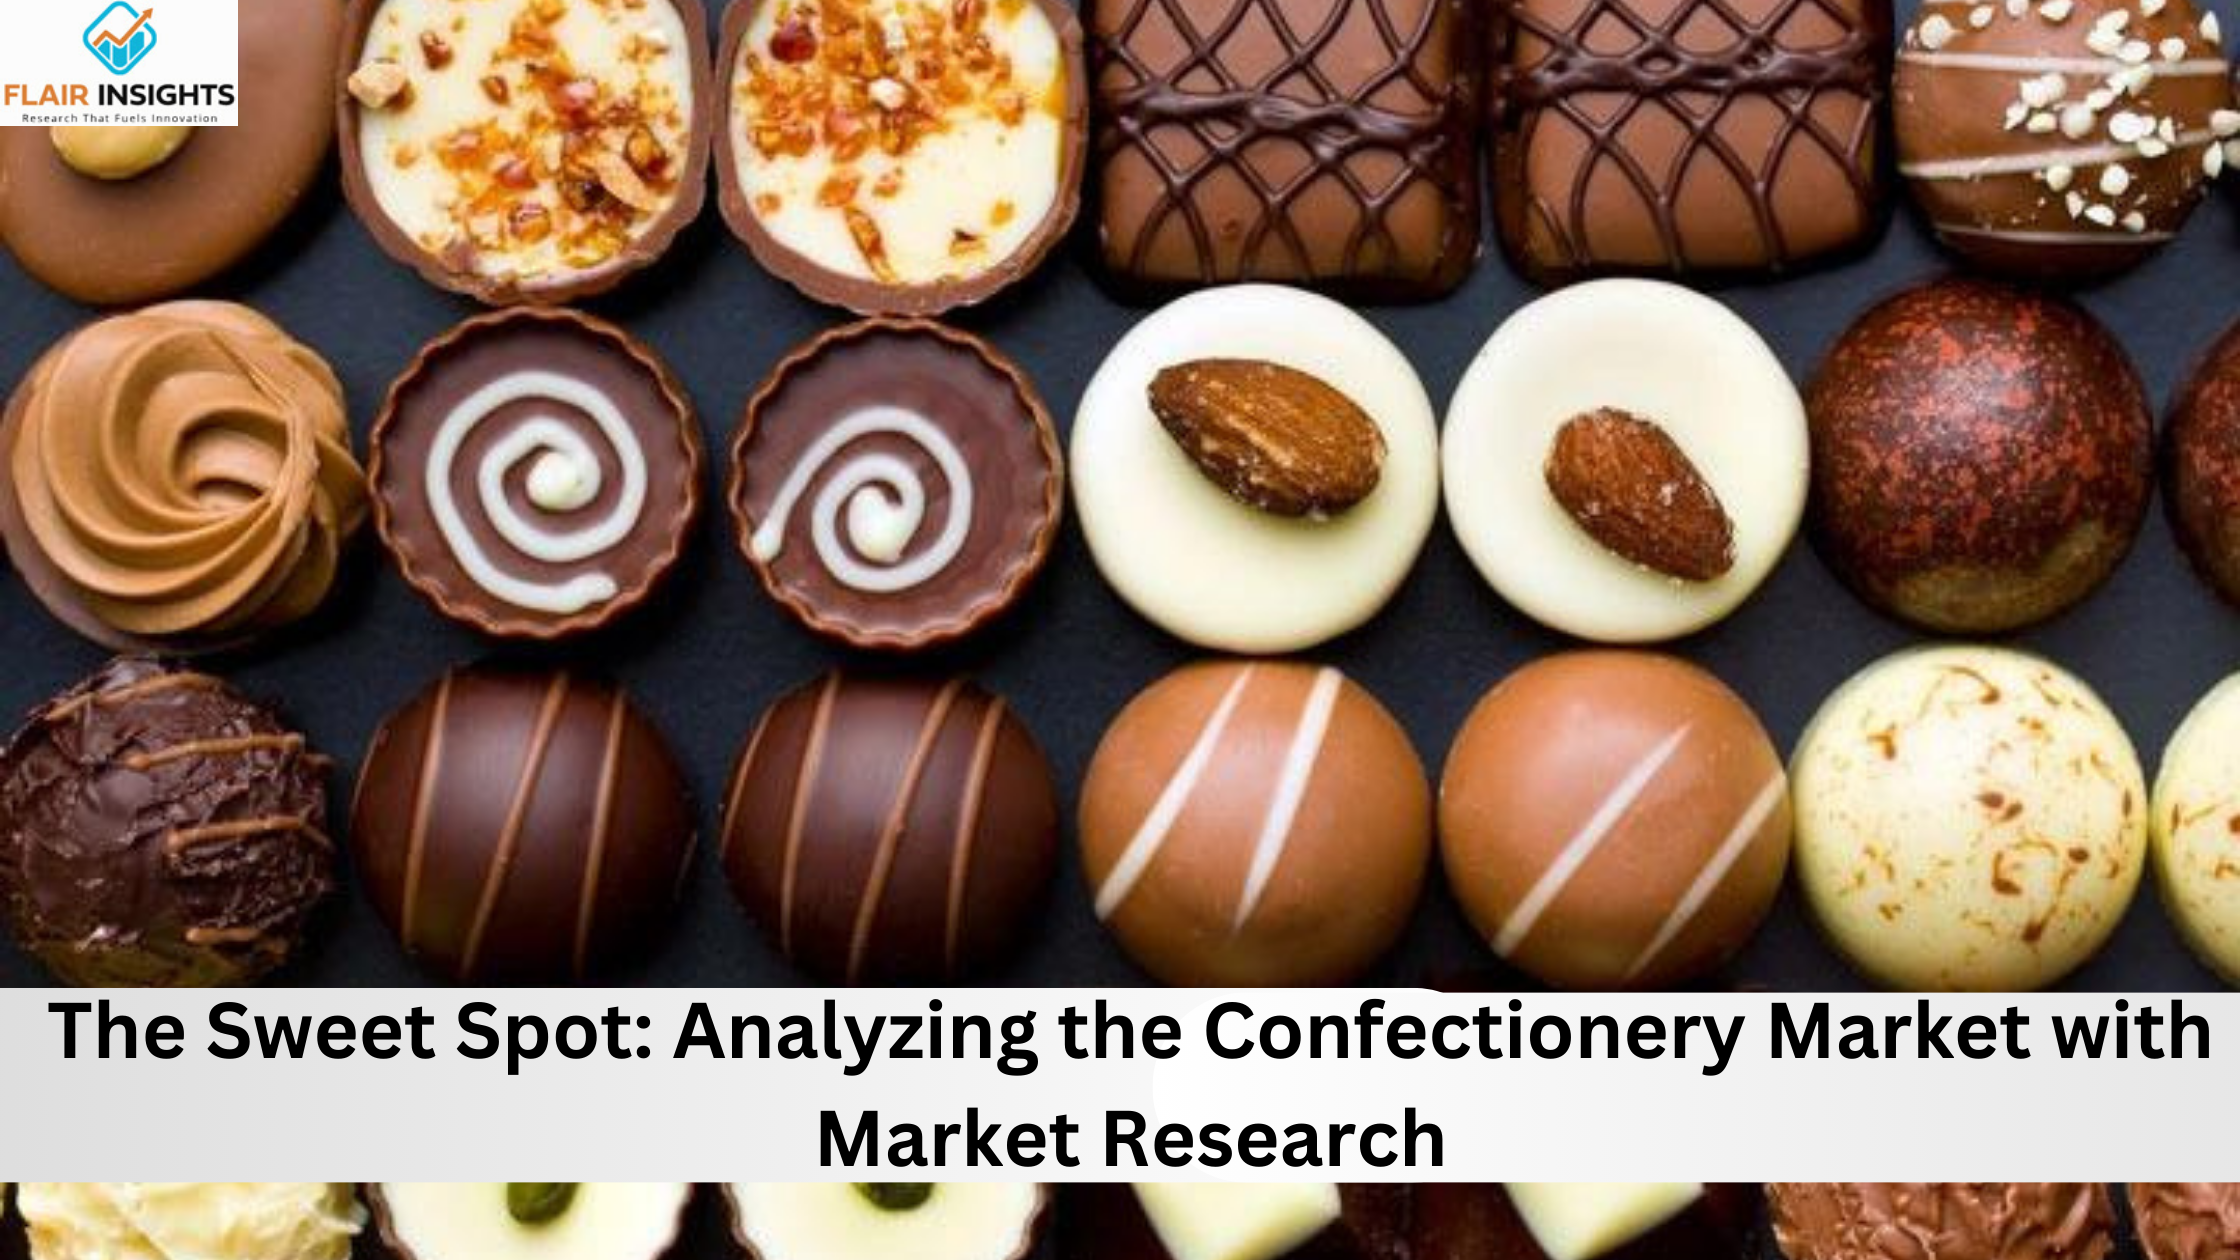 The Sweet Spot: Analyzing the Confectionery Market with Market Research